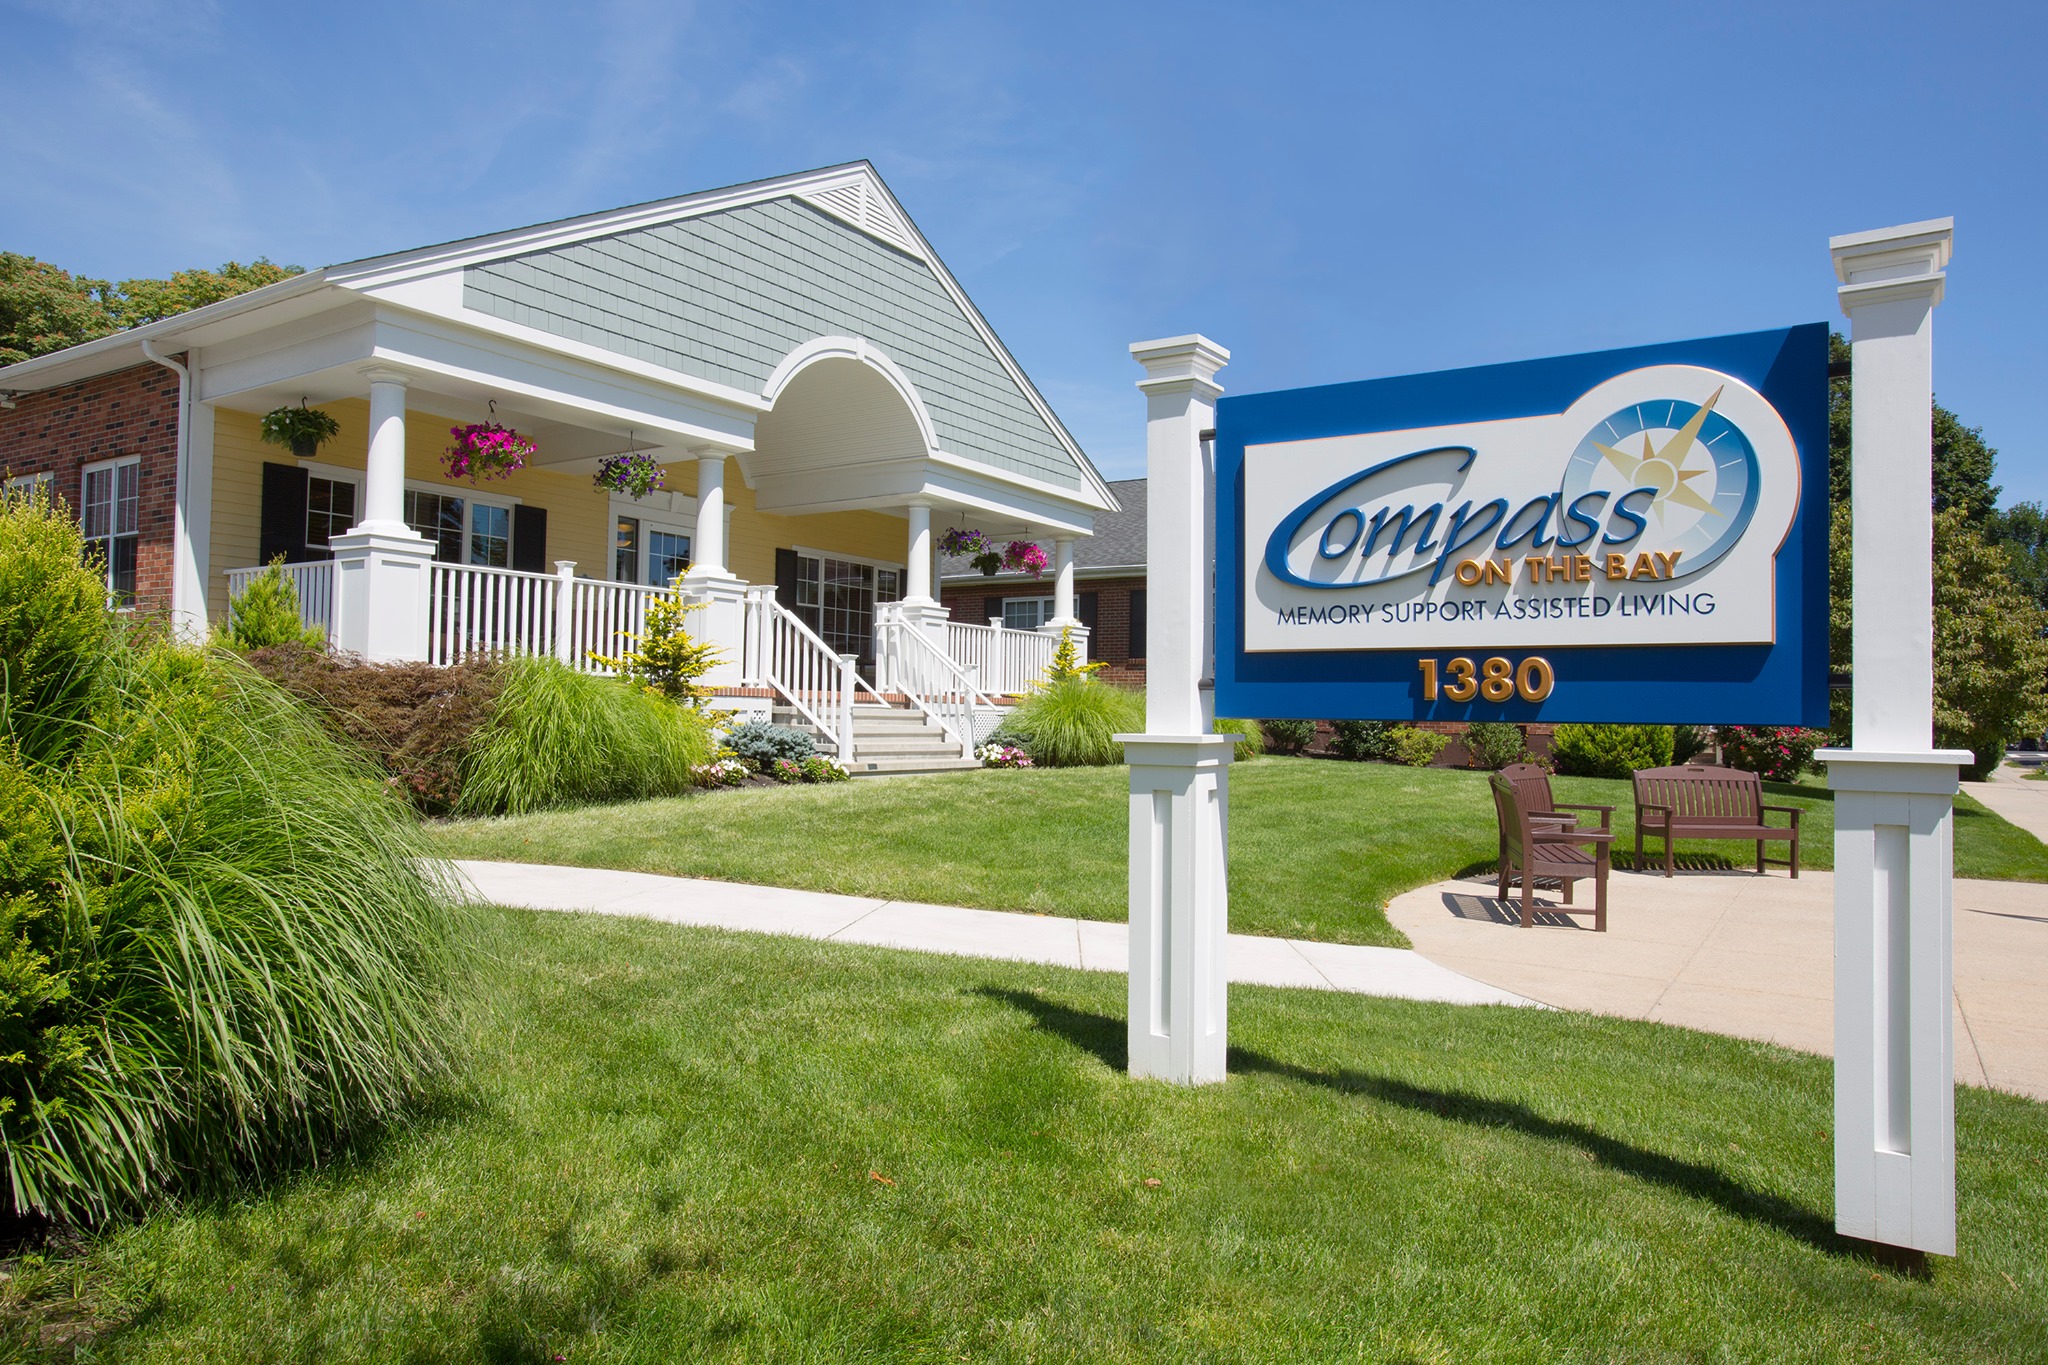 compass-on-the-bay-image-1